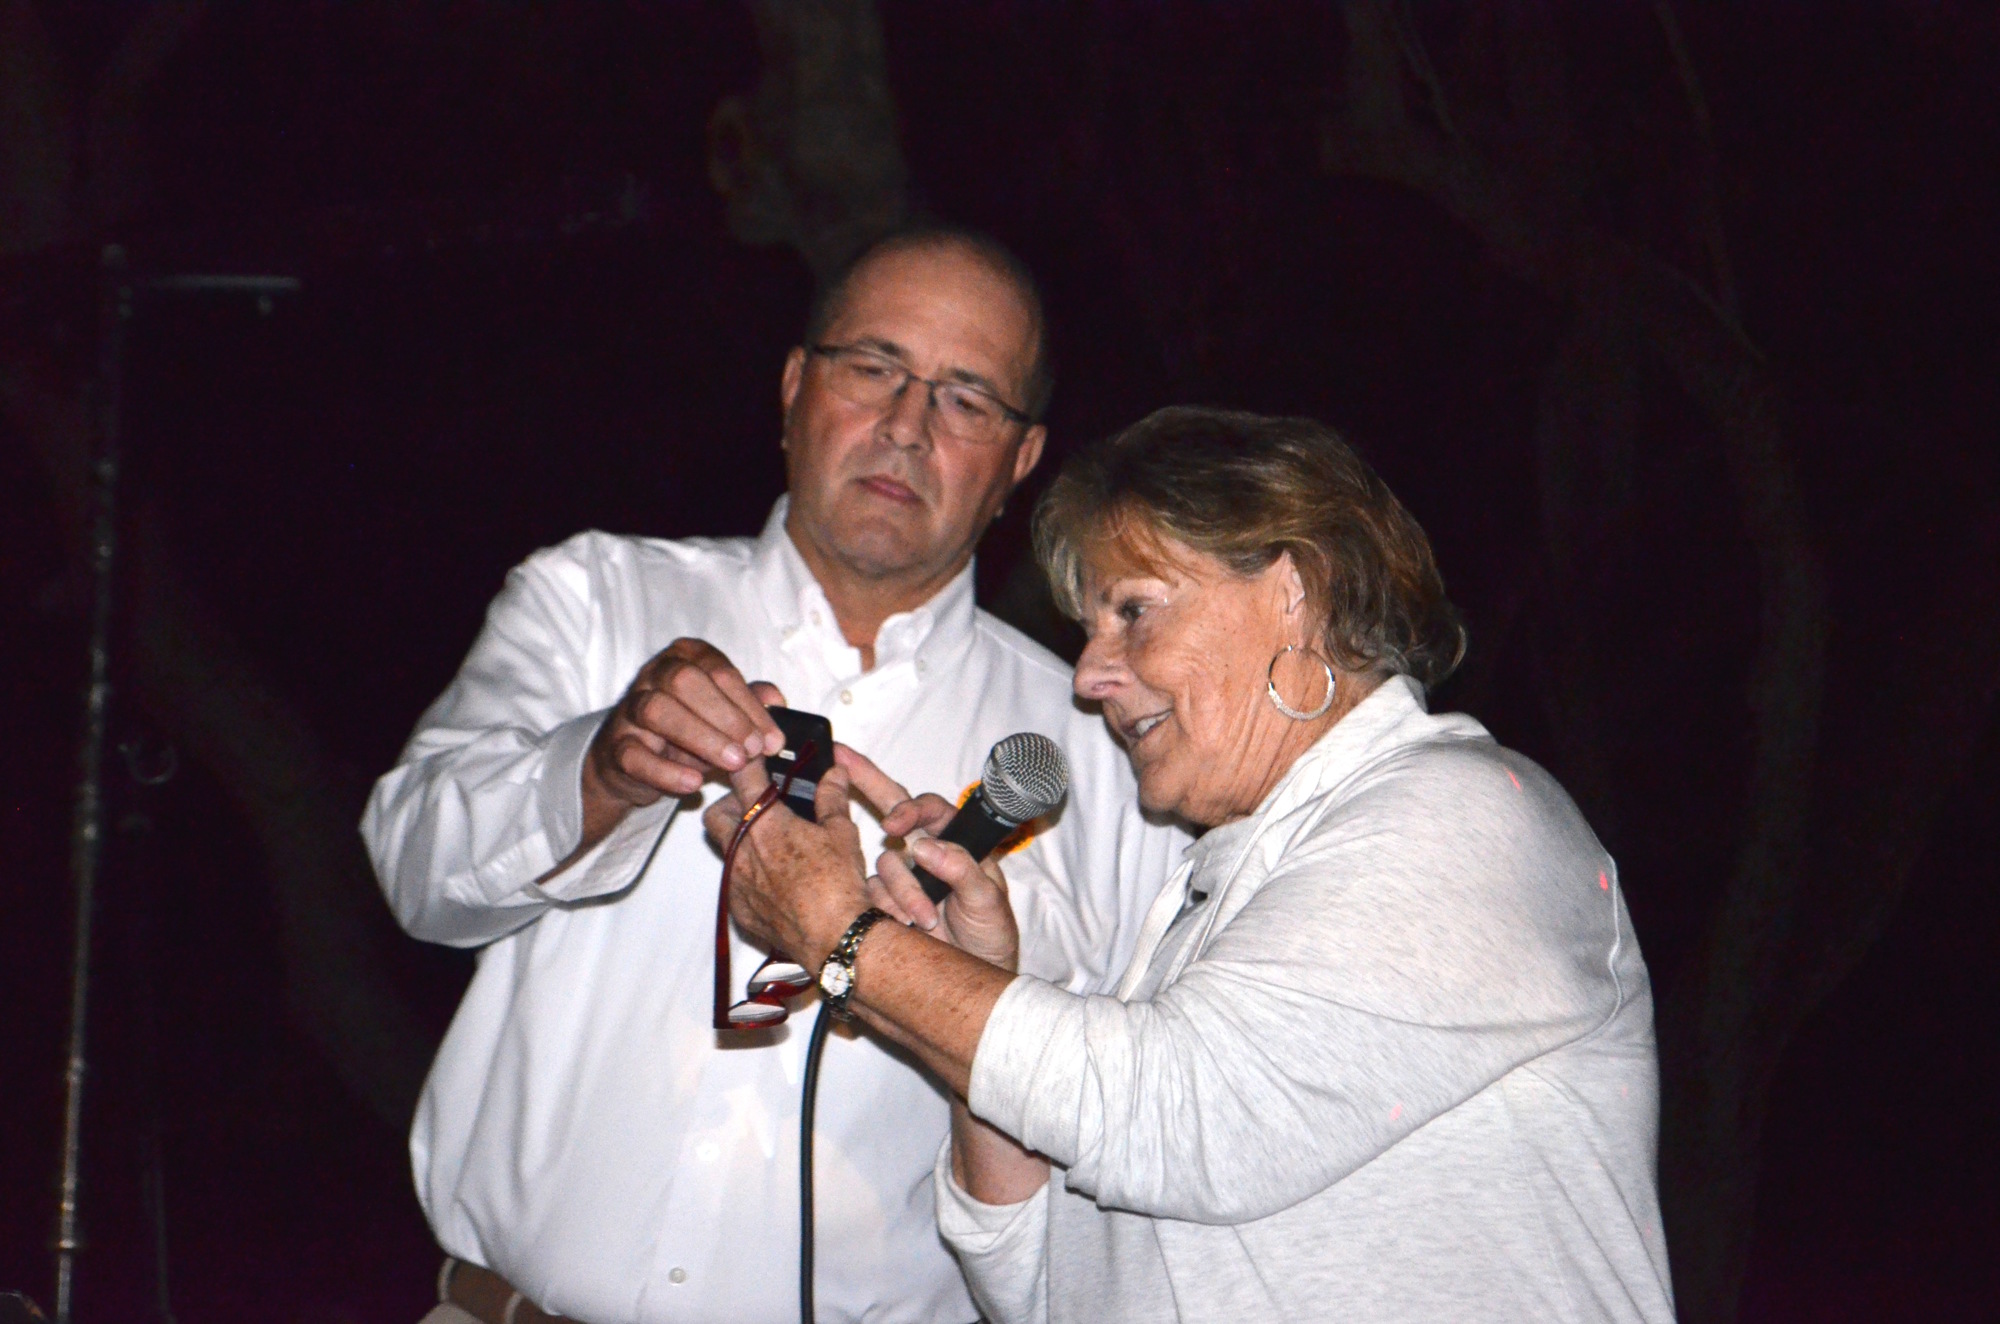 Town Manager Tom Harmer and Longboat Key Chamber of Commerce President Gail Loefgren push the button on to light the trees.